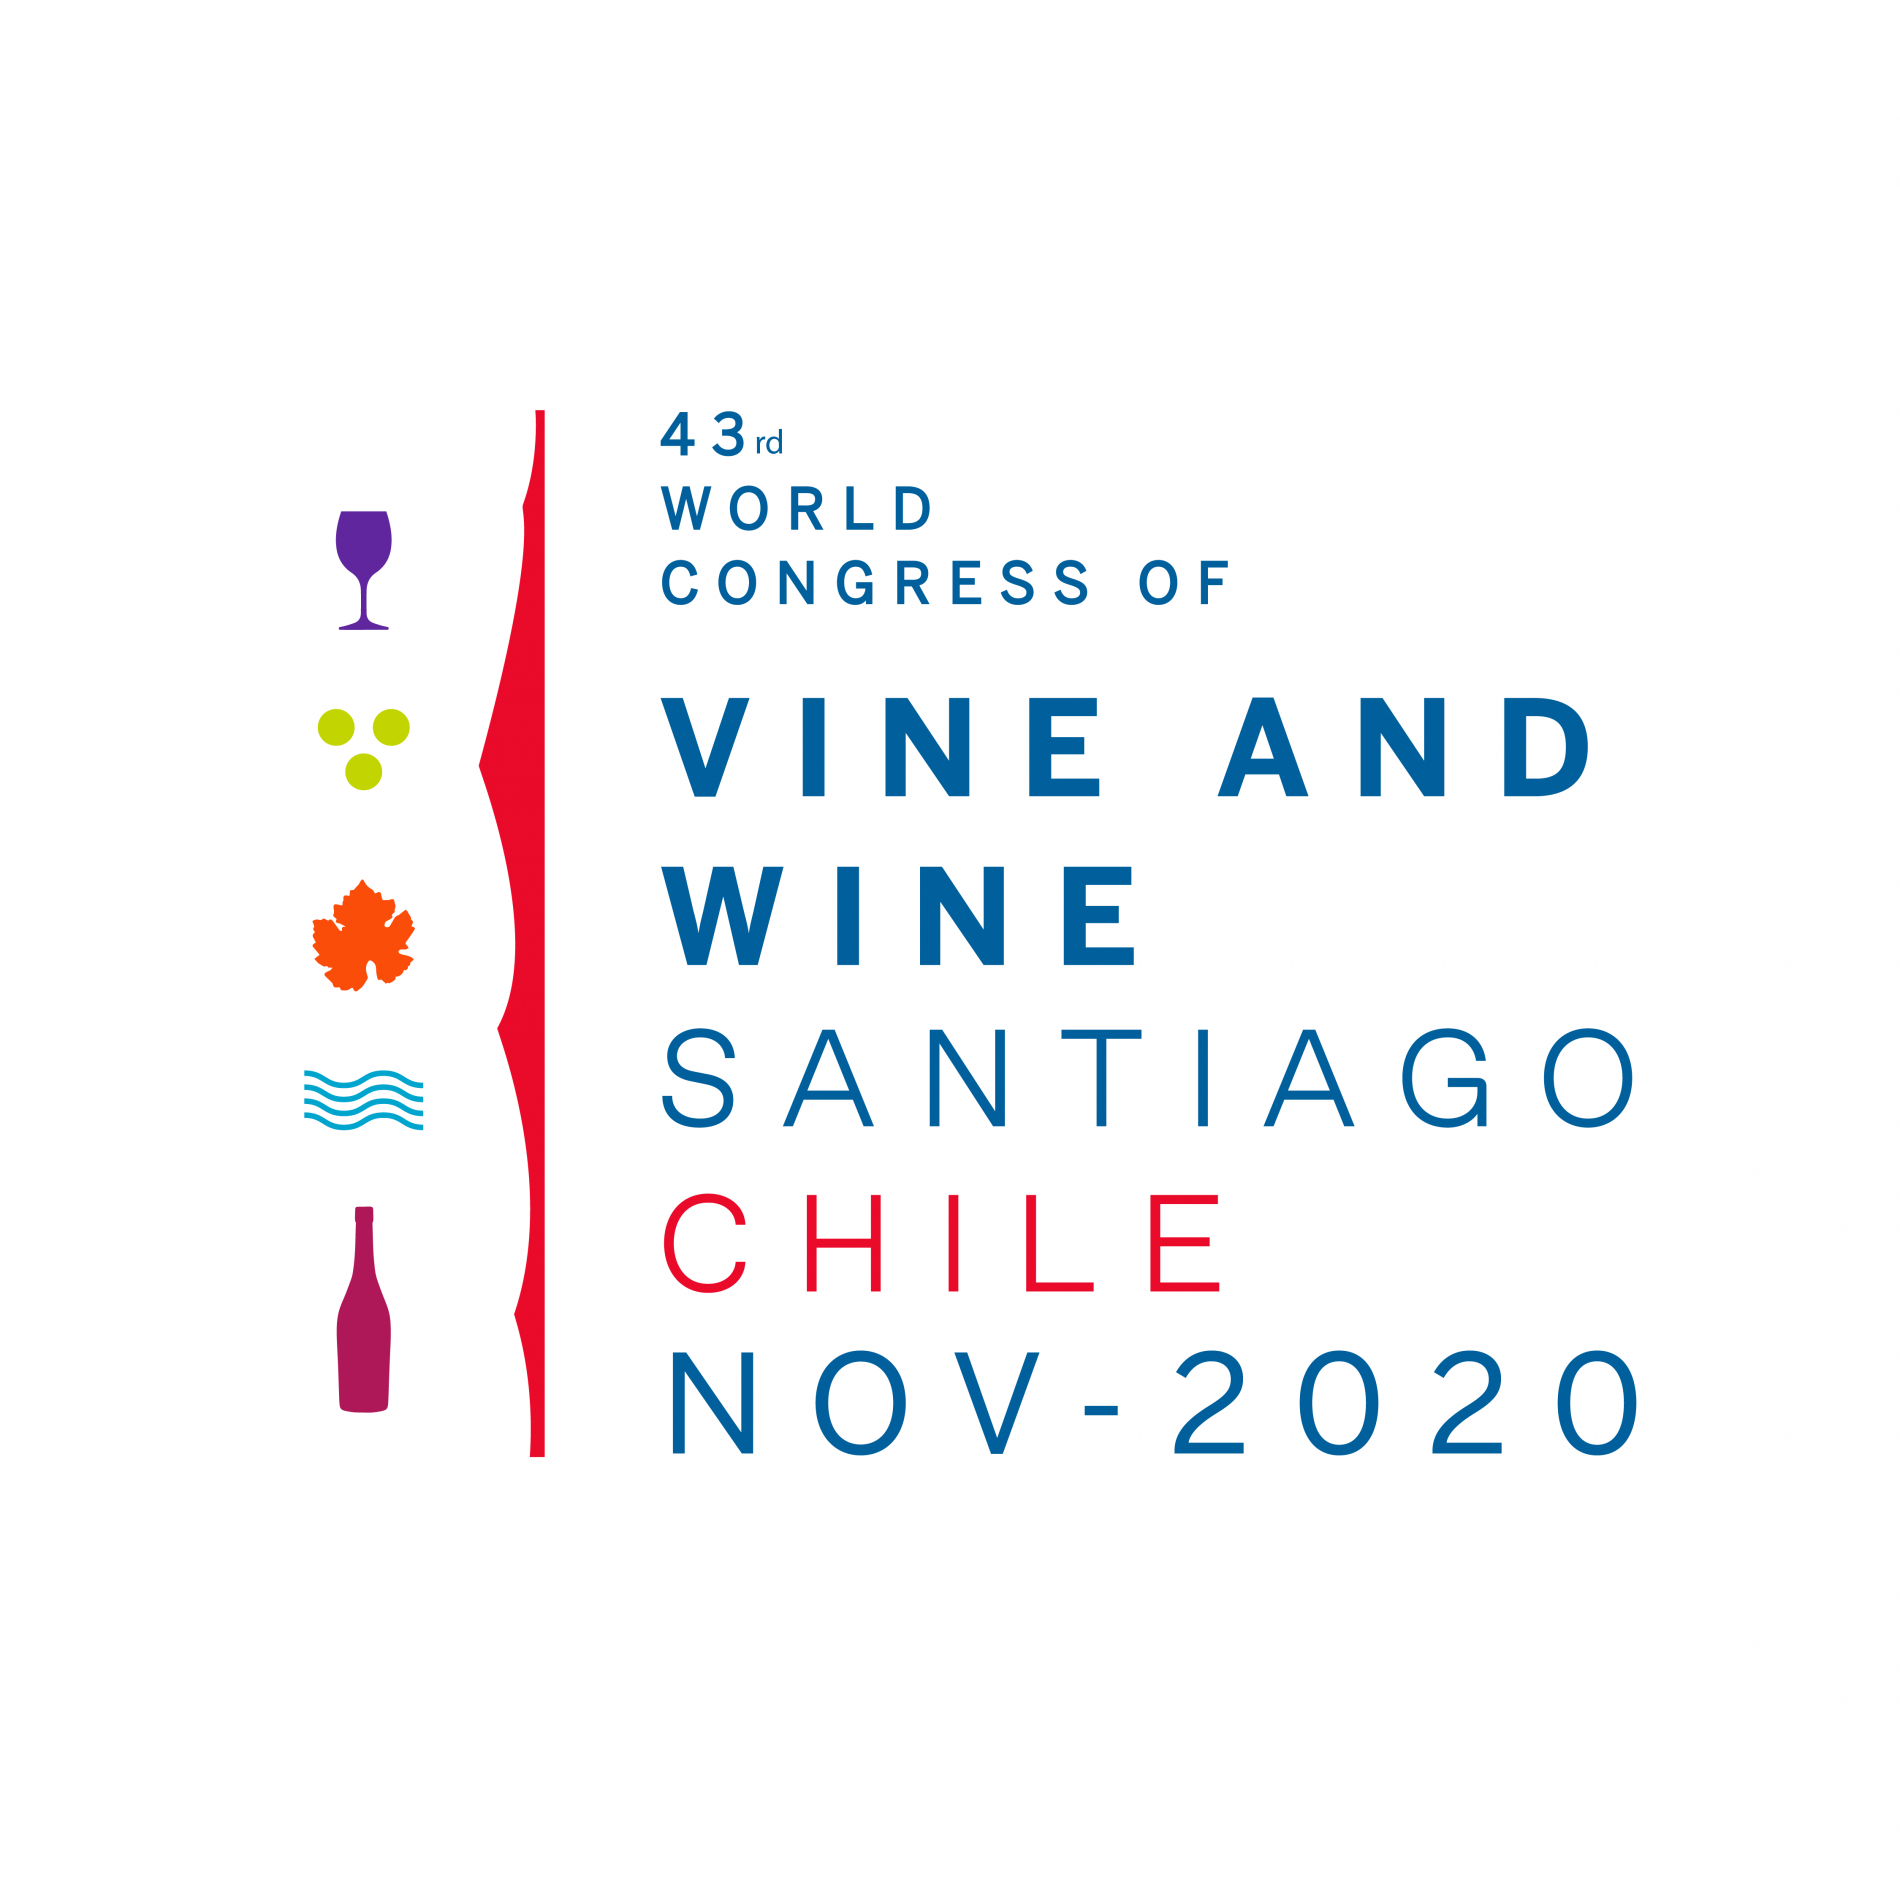 43rd World Congress of Vine and Wine 